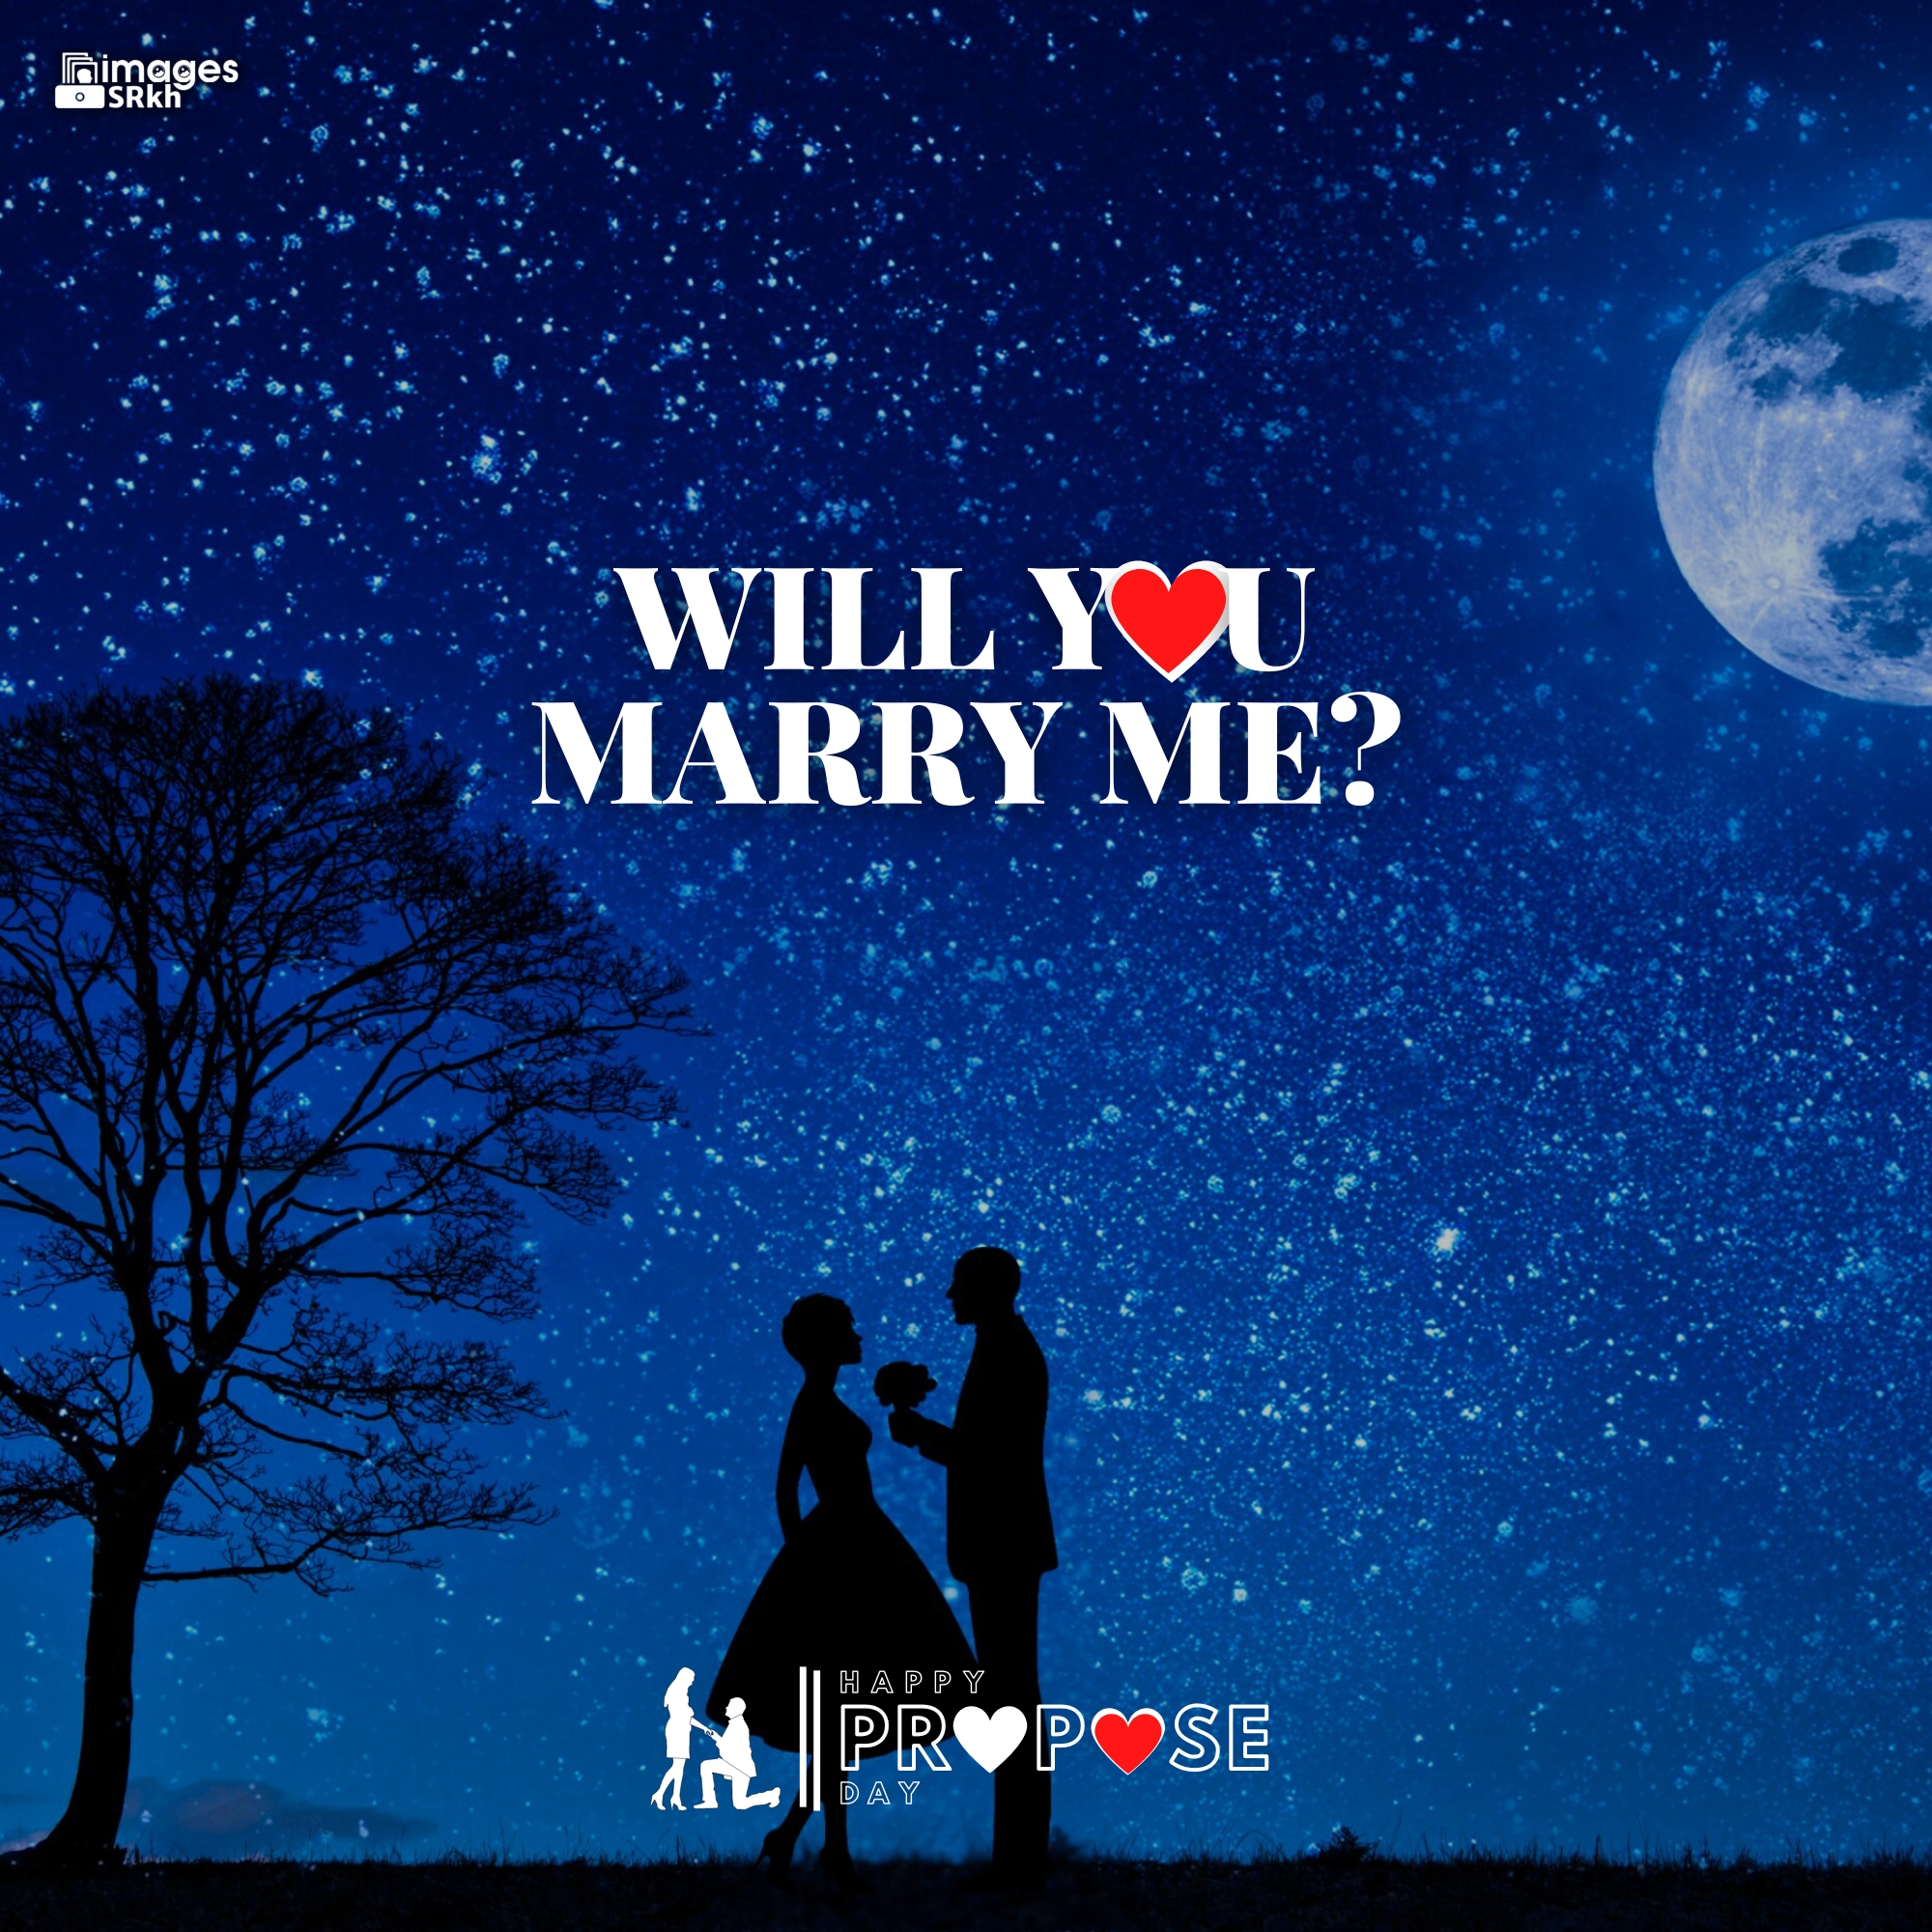 Propose Day Images | 279 | Will You MARRY ME